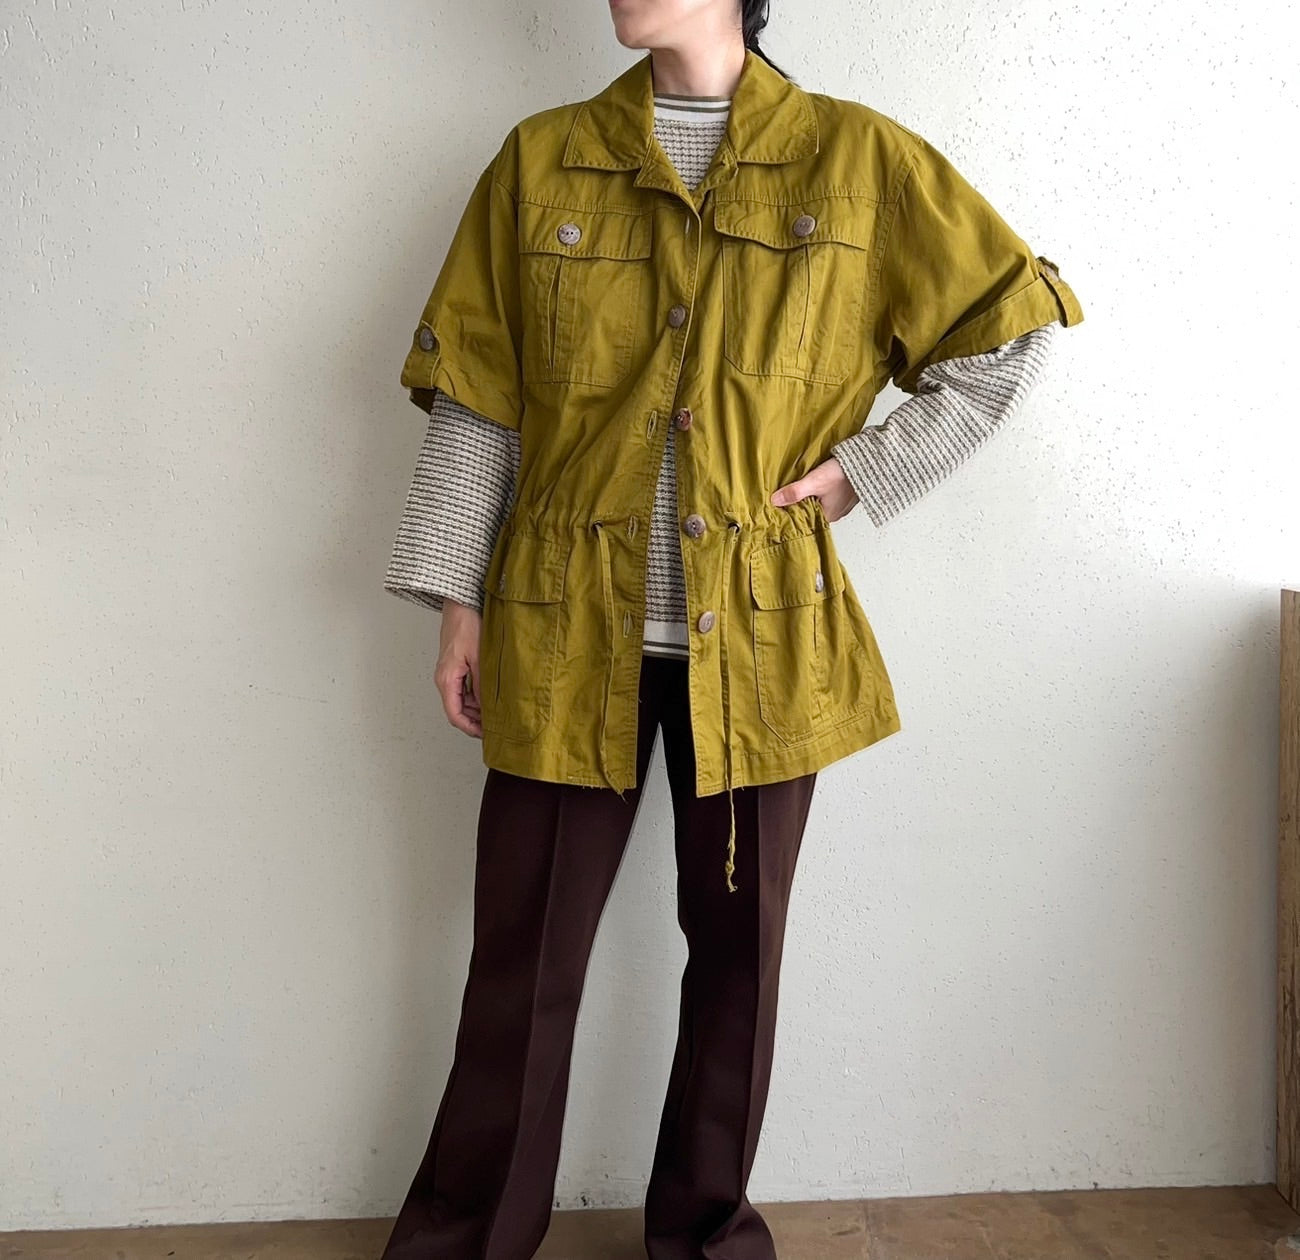 90s Design Jacket Made in Italy